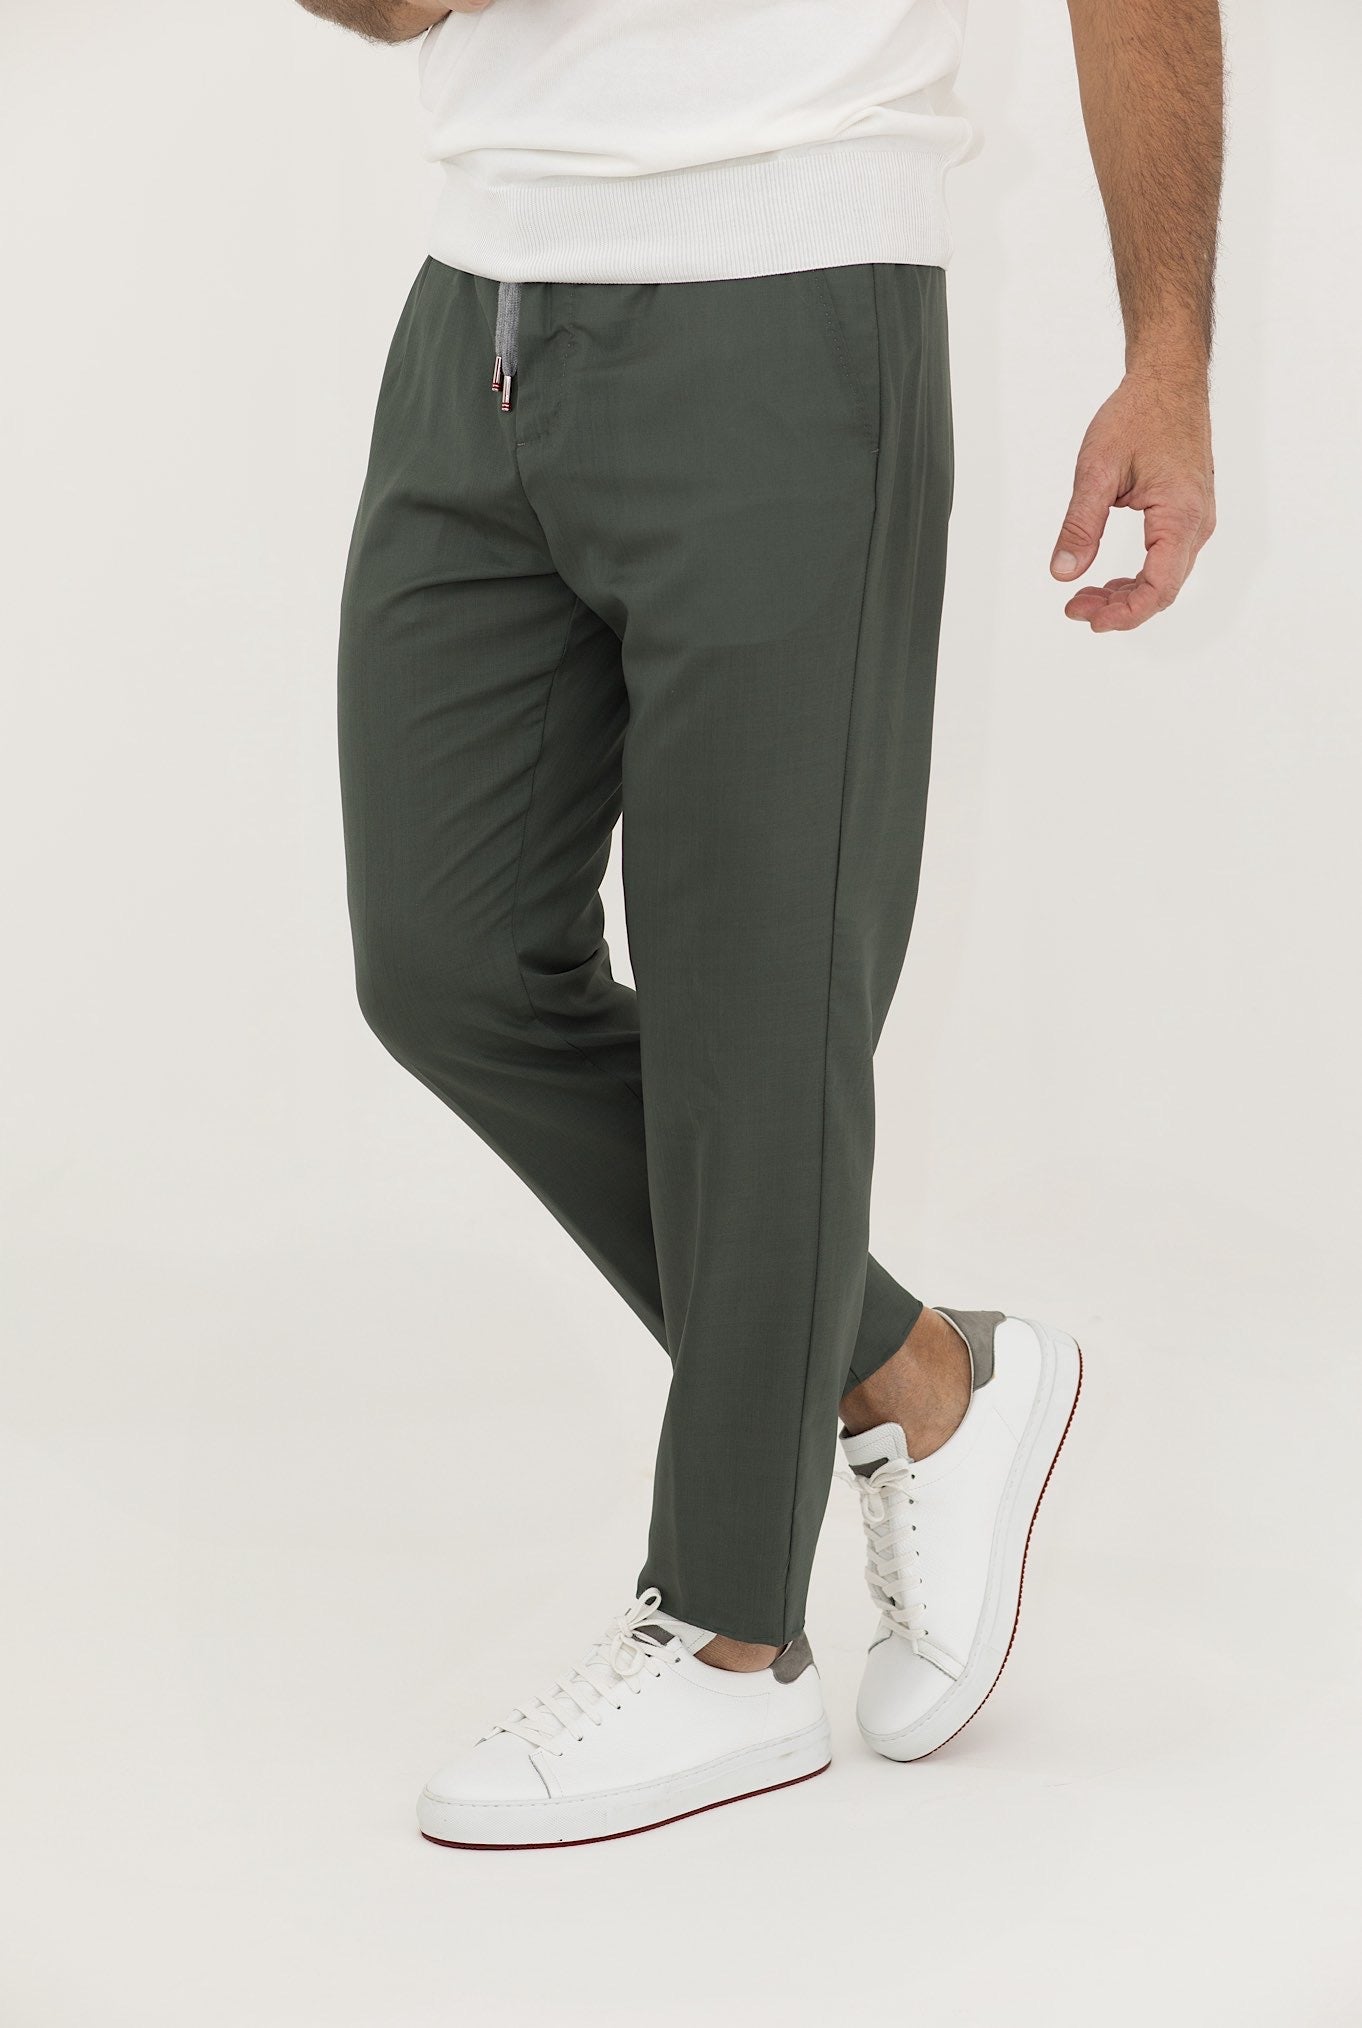 MARCO PESCAROLO Olive Green Wool and Silk Drawstring Trousers